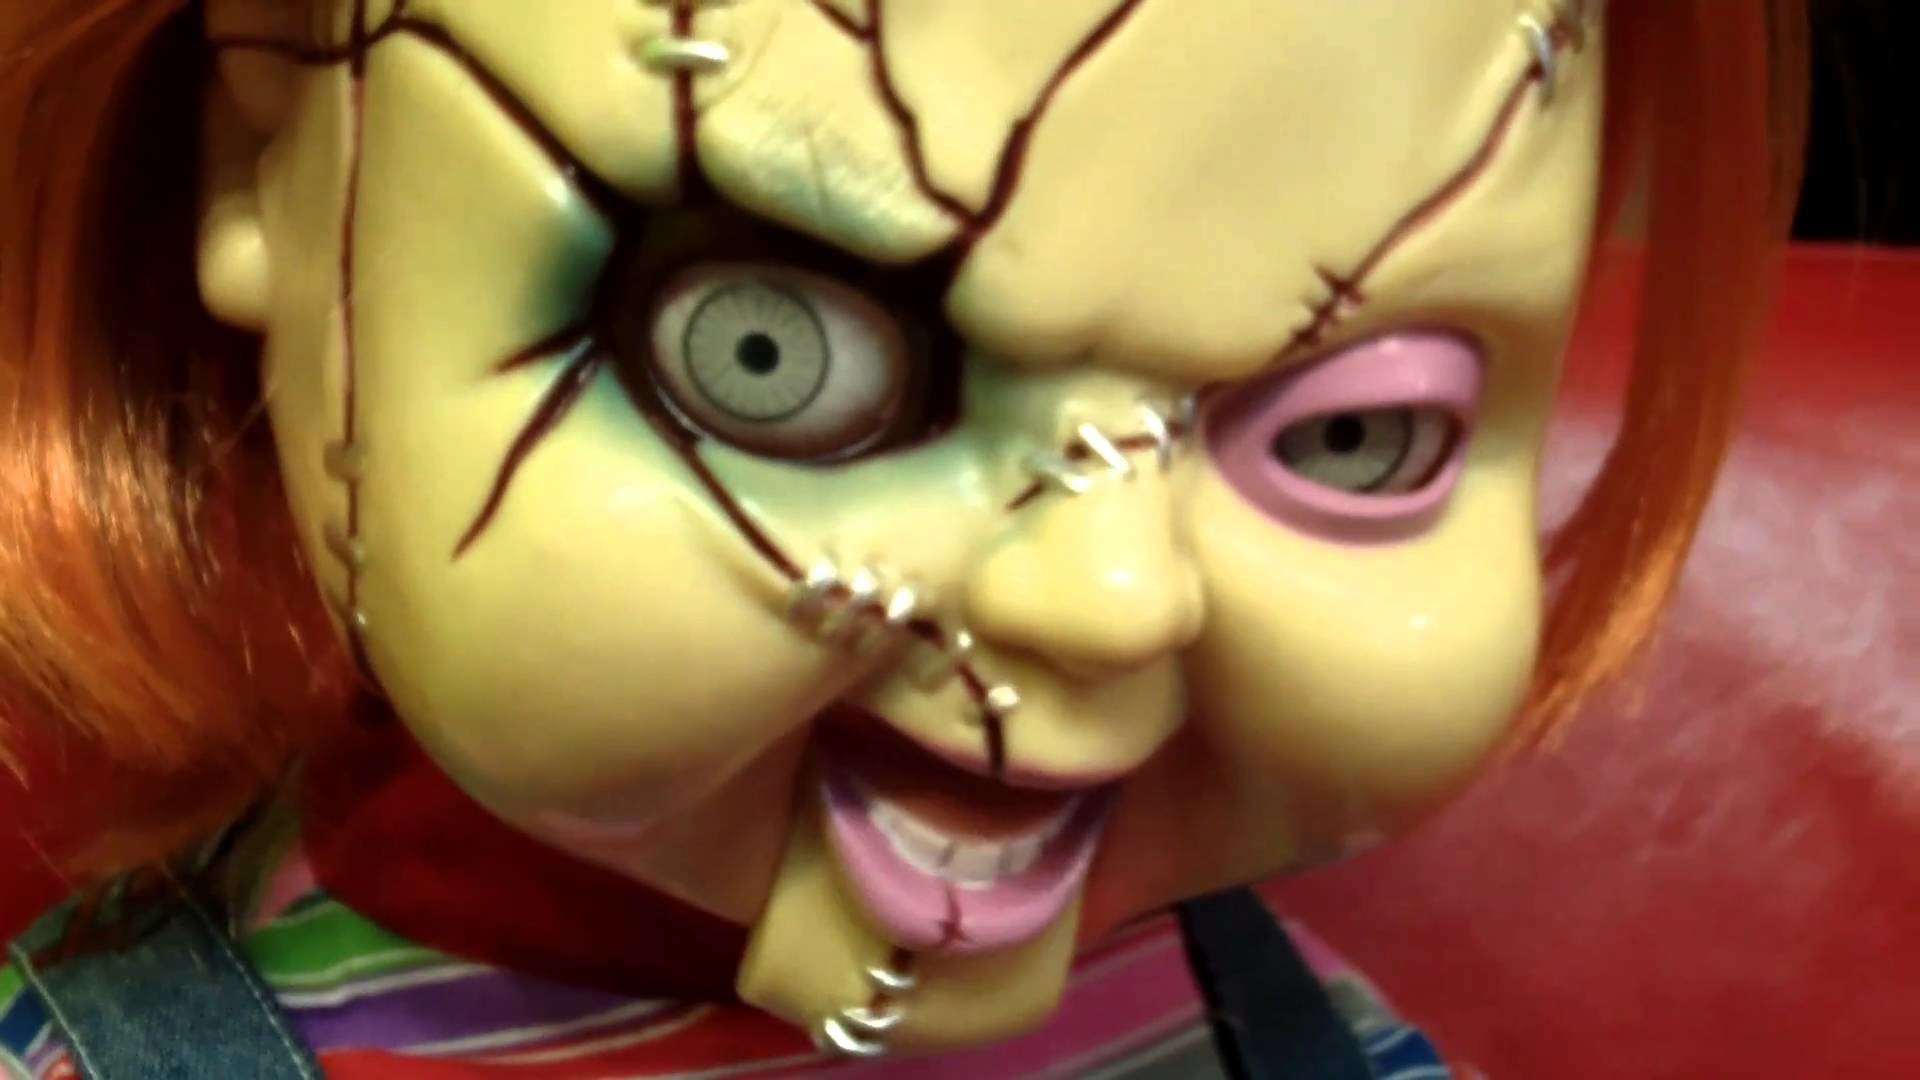 Chucky SCARY Animated Life-Size Talking Doll by Mike Mozart of  TheToyChannel – YouTube